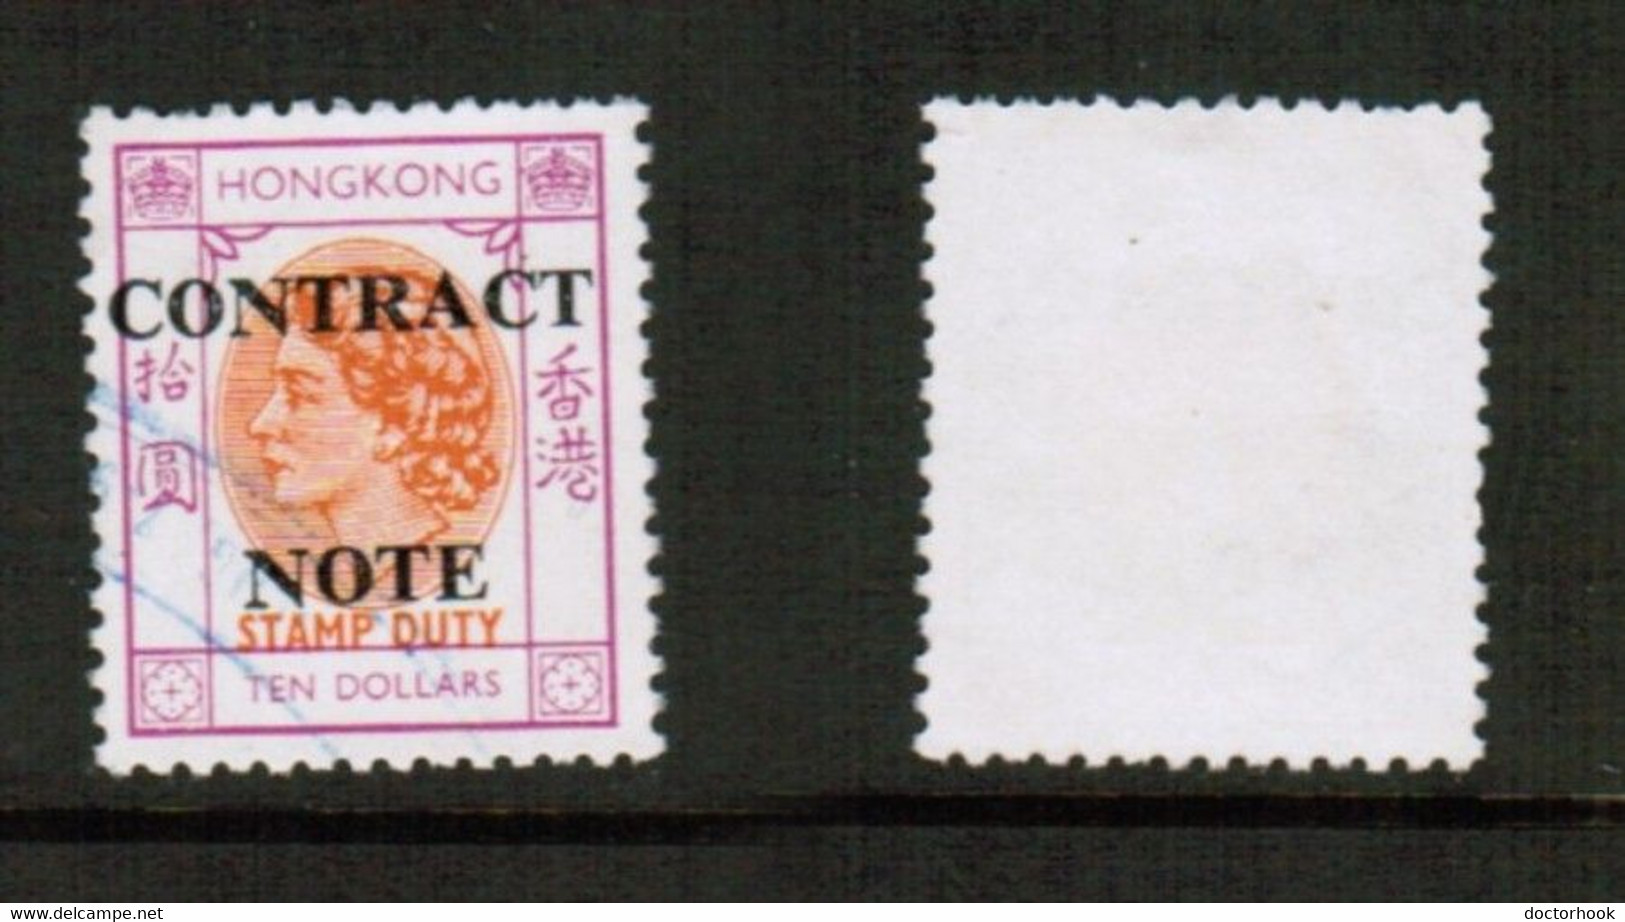 HONG KONG   $10.00 DOLLAR CONTRACT NOTE FISCAL USED (CONDITION AS PER SCAN) (Stamp Scan # 828-17) - Stempelmarke Als Postmarke Verwendet